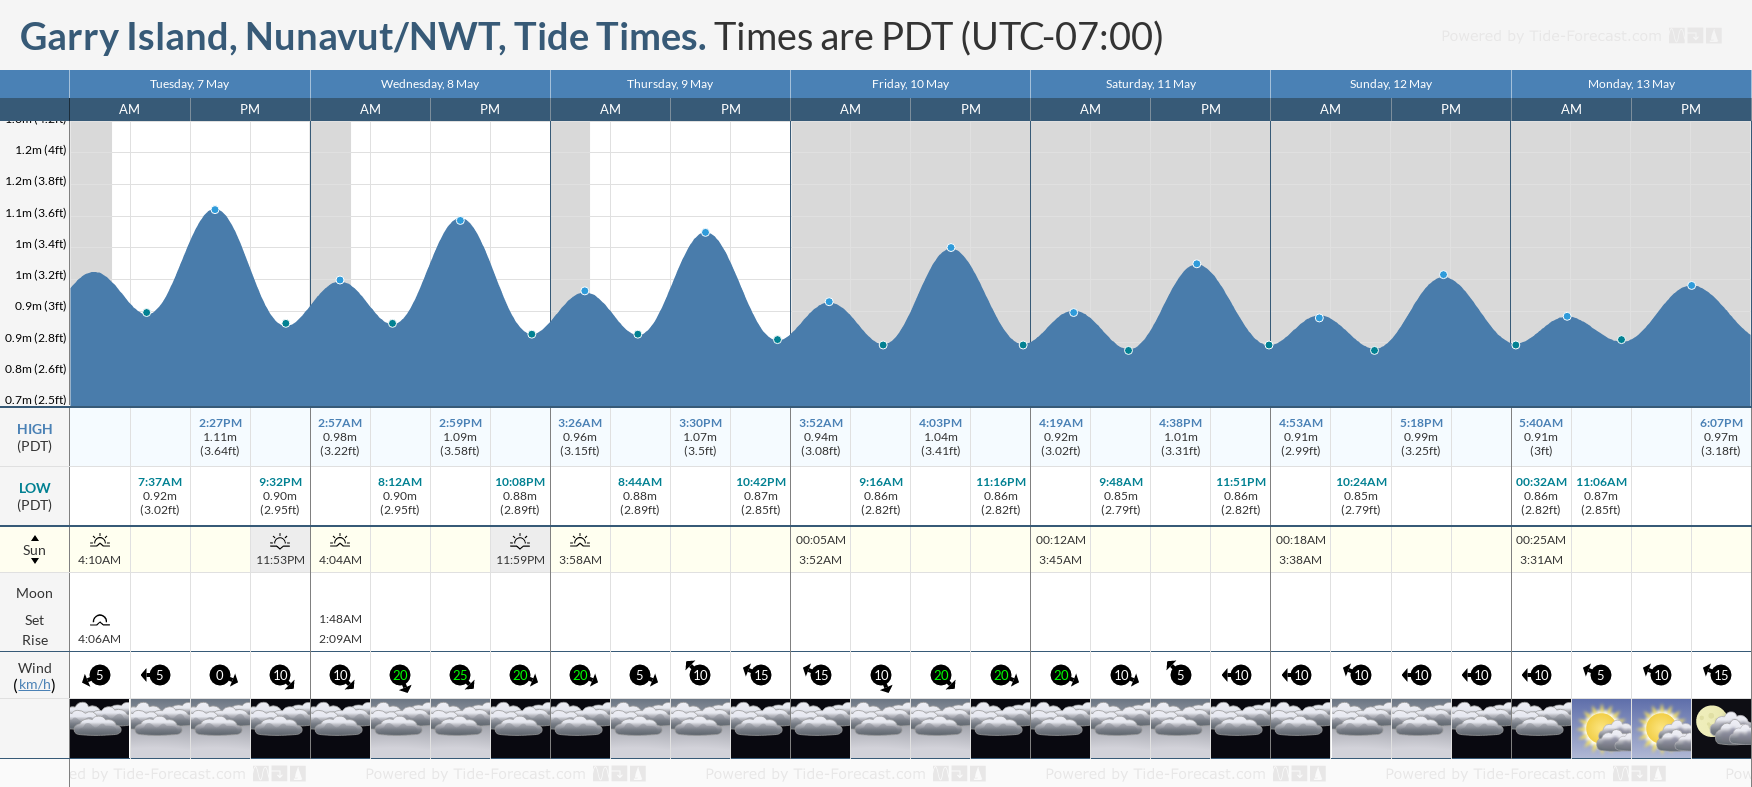 Garry Island, Nunavut/NWT Tide Chart including high and low tide tide times for the next 7 days